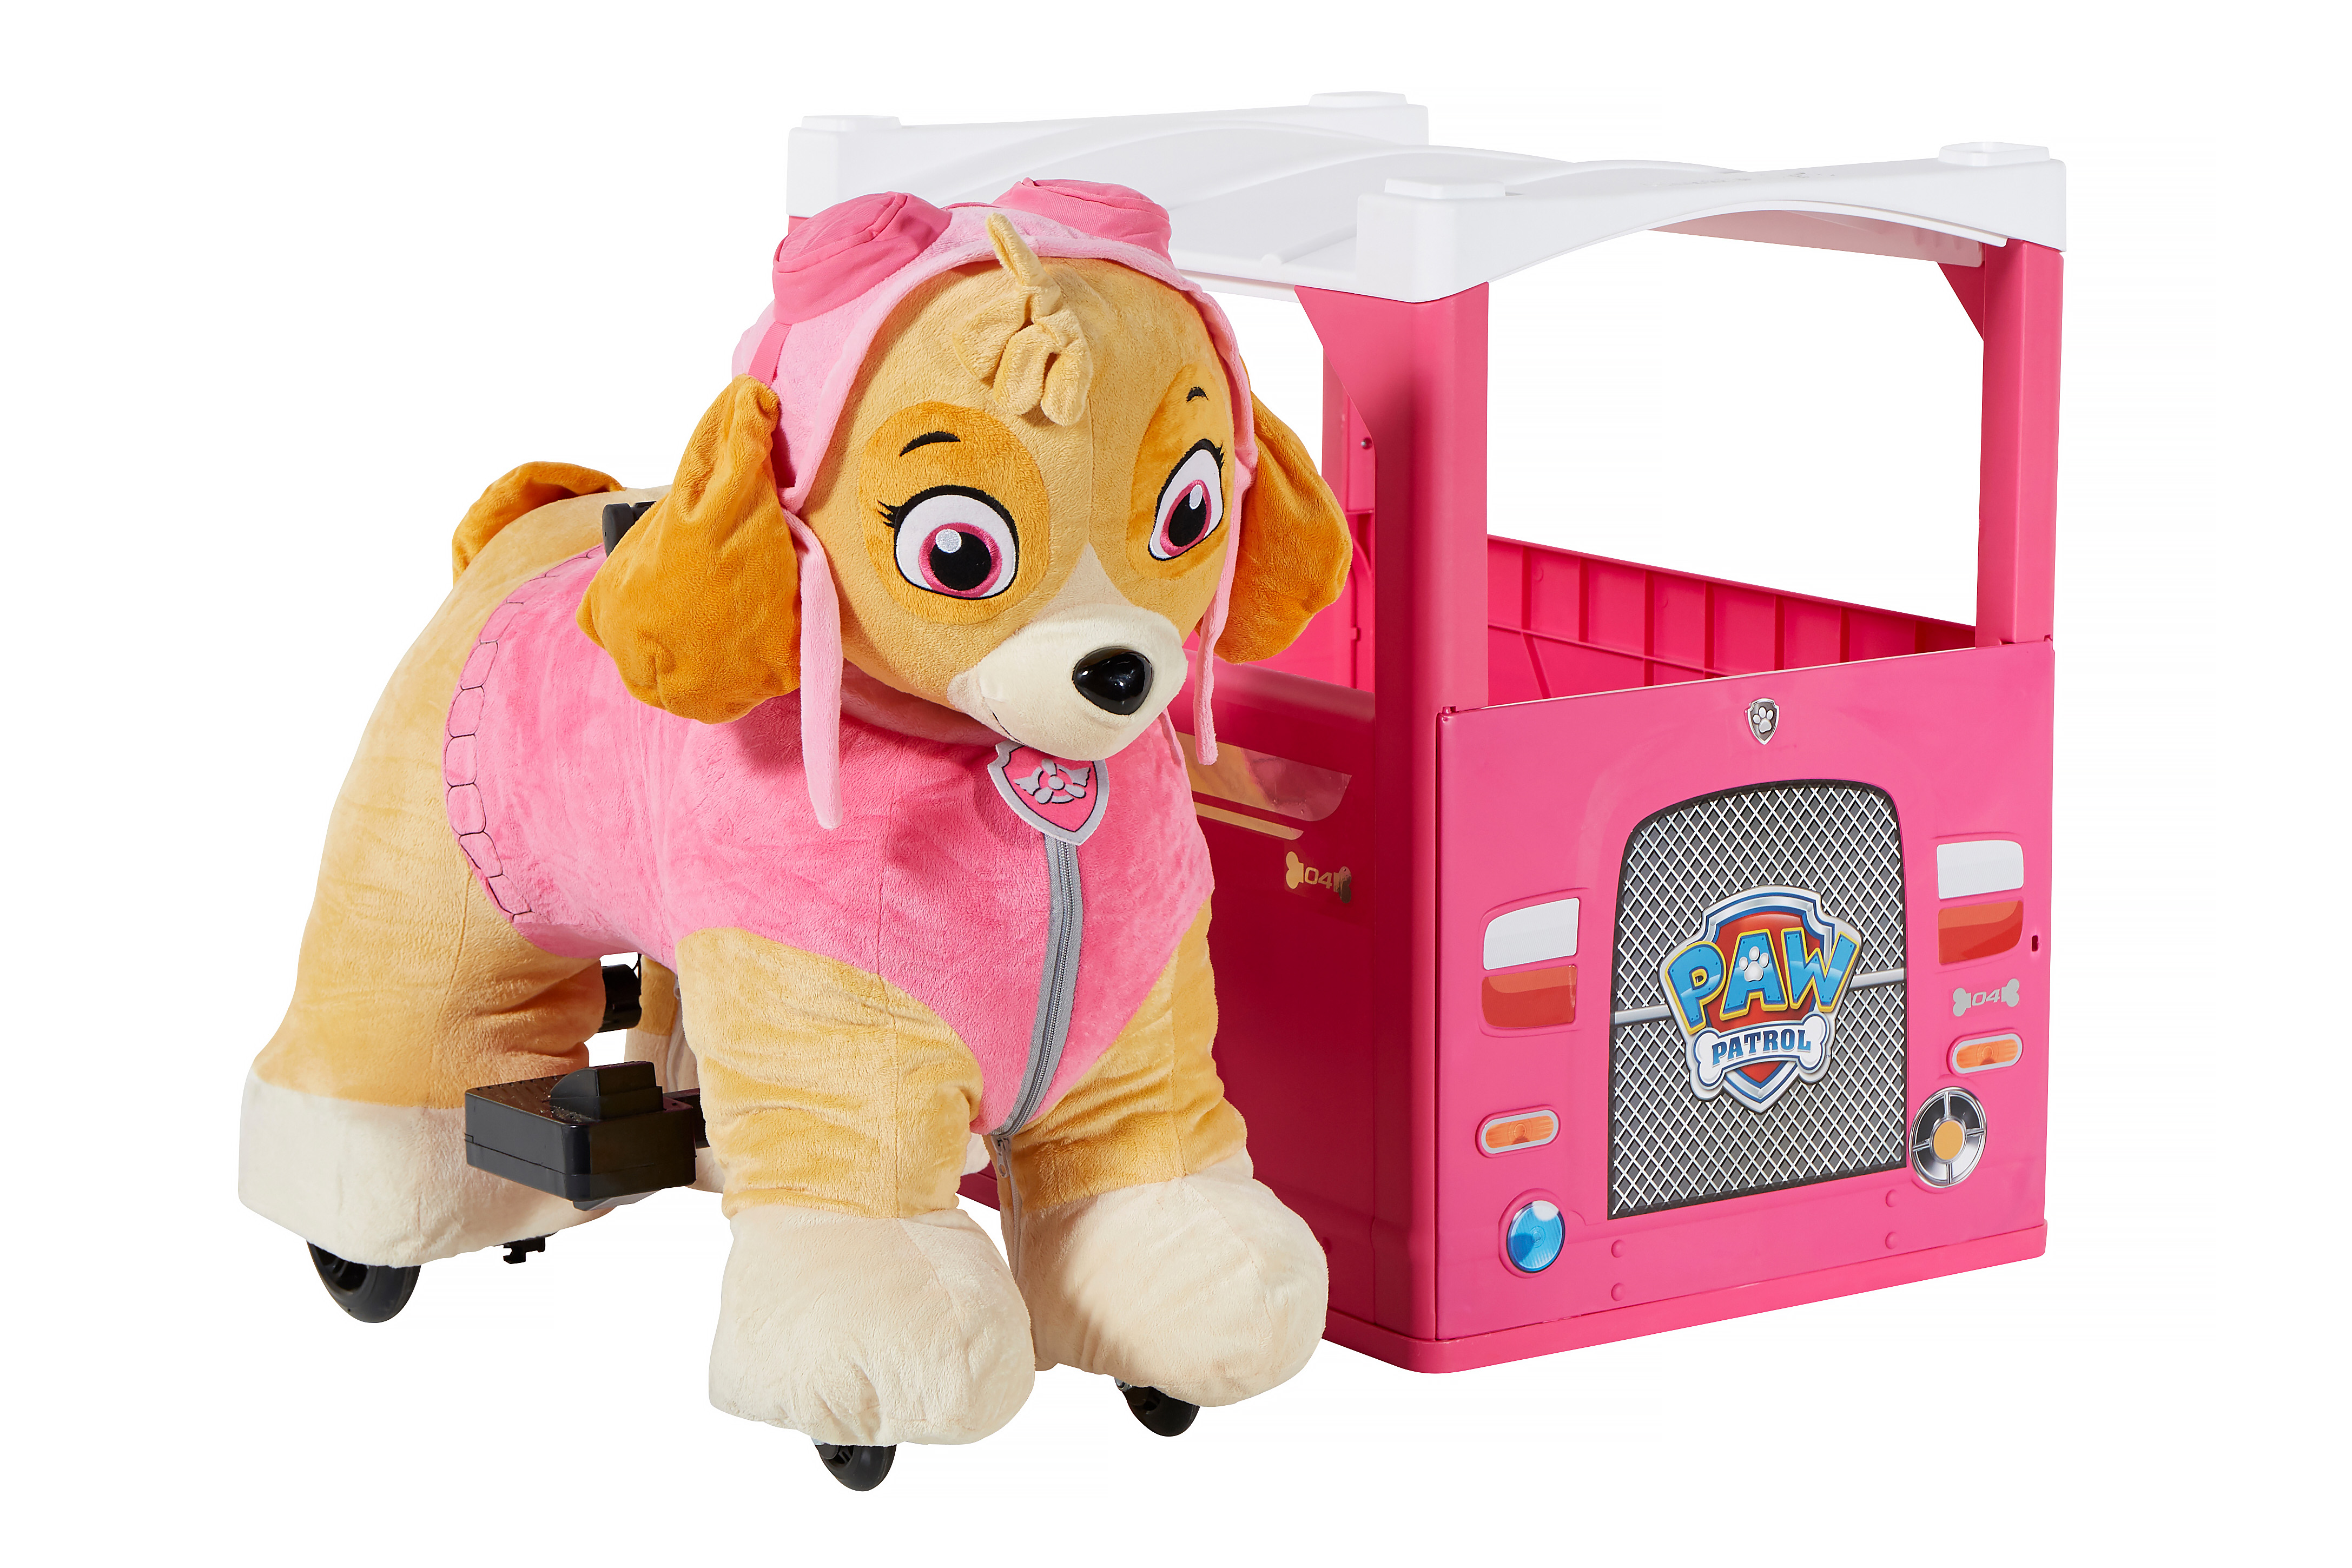 Paw Patrol 6 Volt Plush Skye Ride-on with Pup House Included by Dynacraft! - image 3 of 7